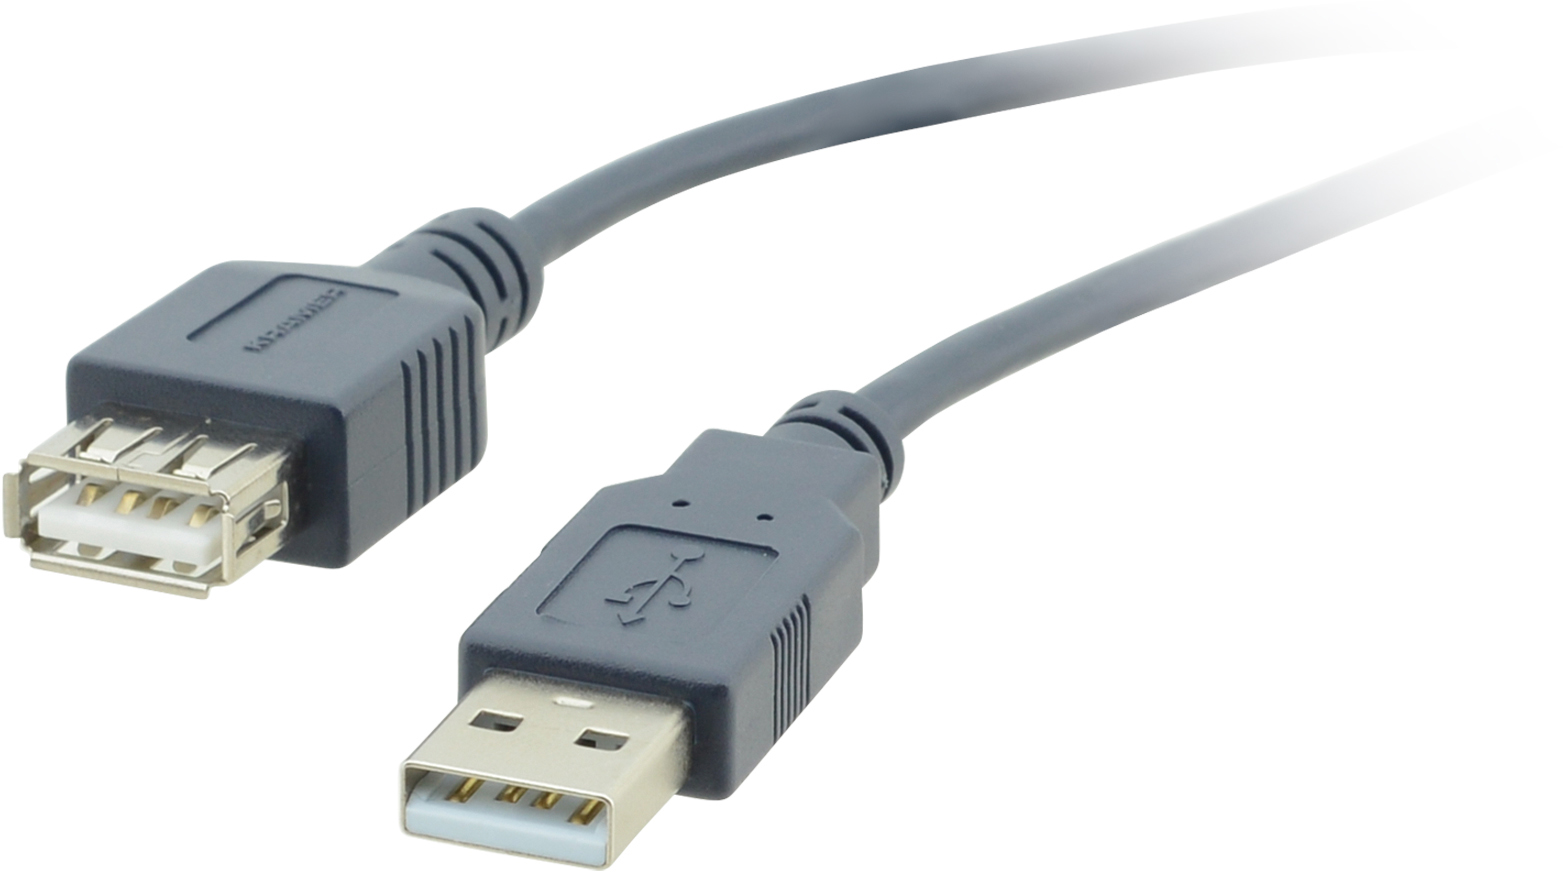 You Recently Viewed Kramer USB 2.0 A to A Ext Cable Image